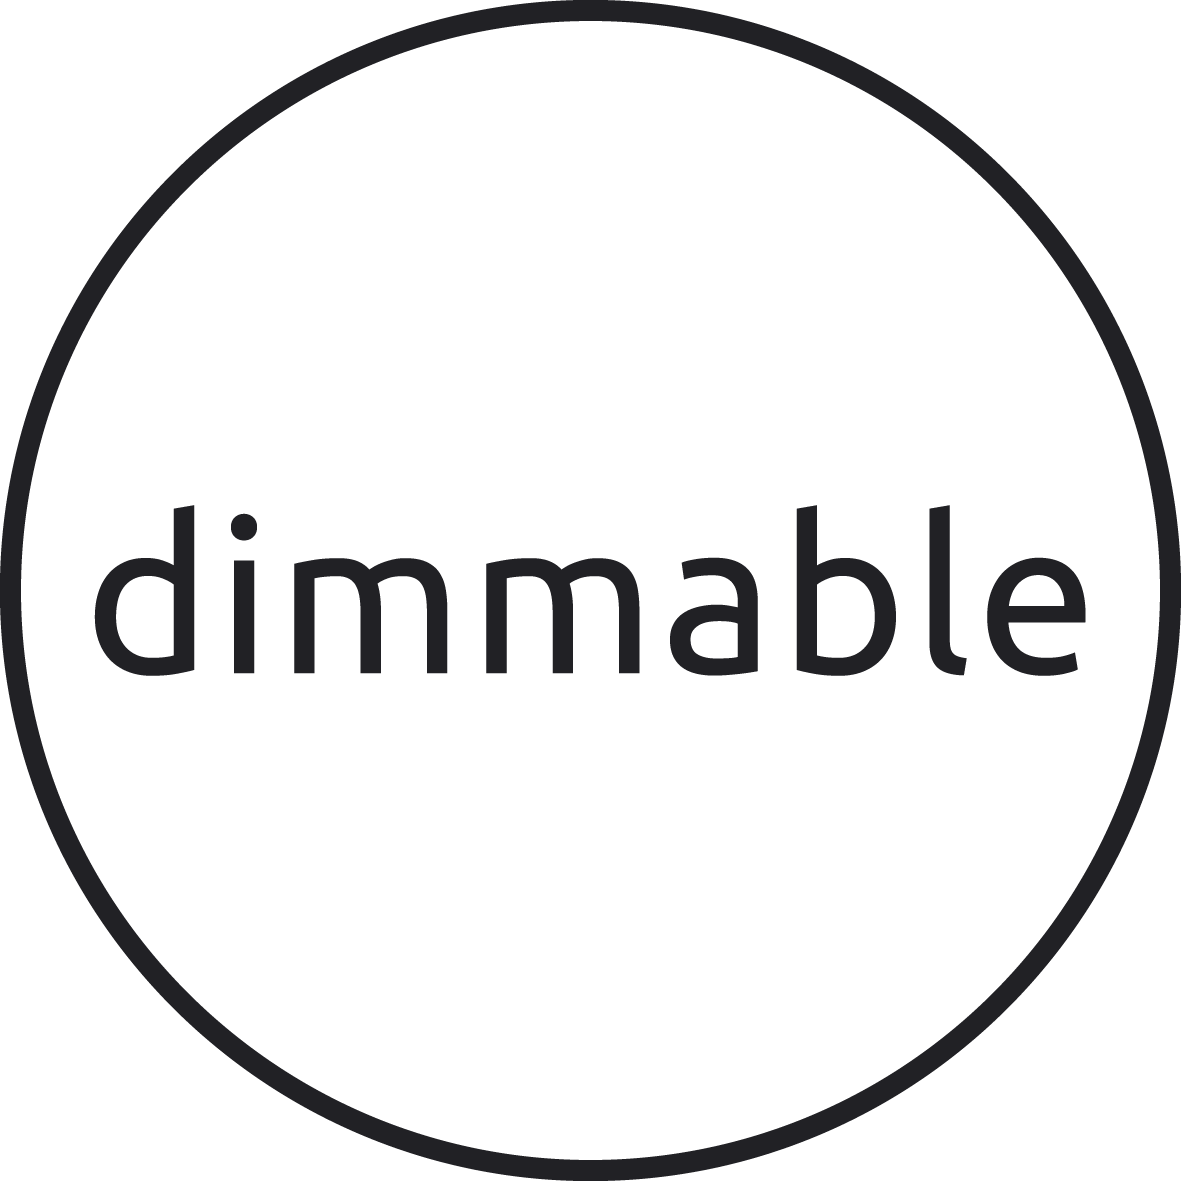 DIMMABLE